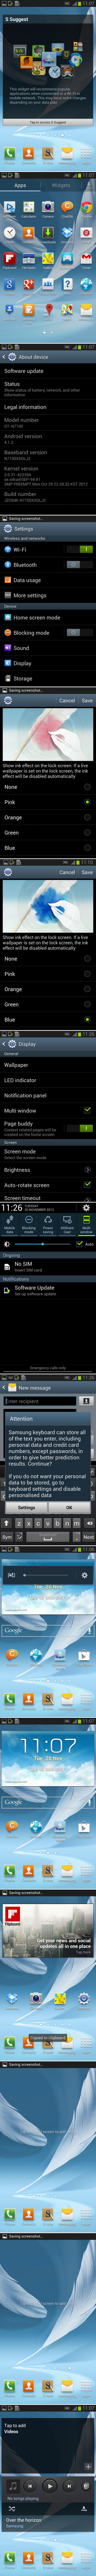 Android 4.1.2 a Galaxy Note II-n